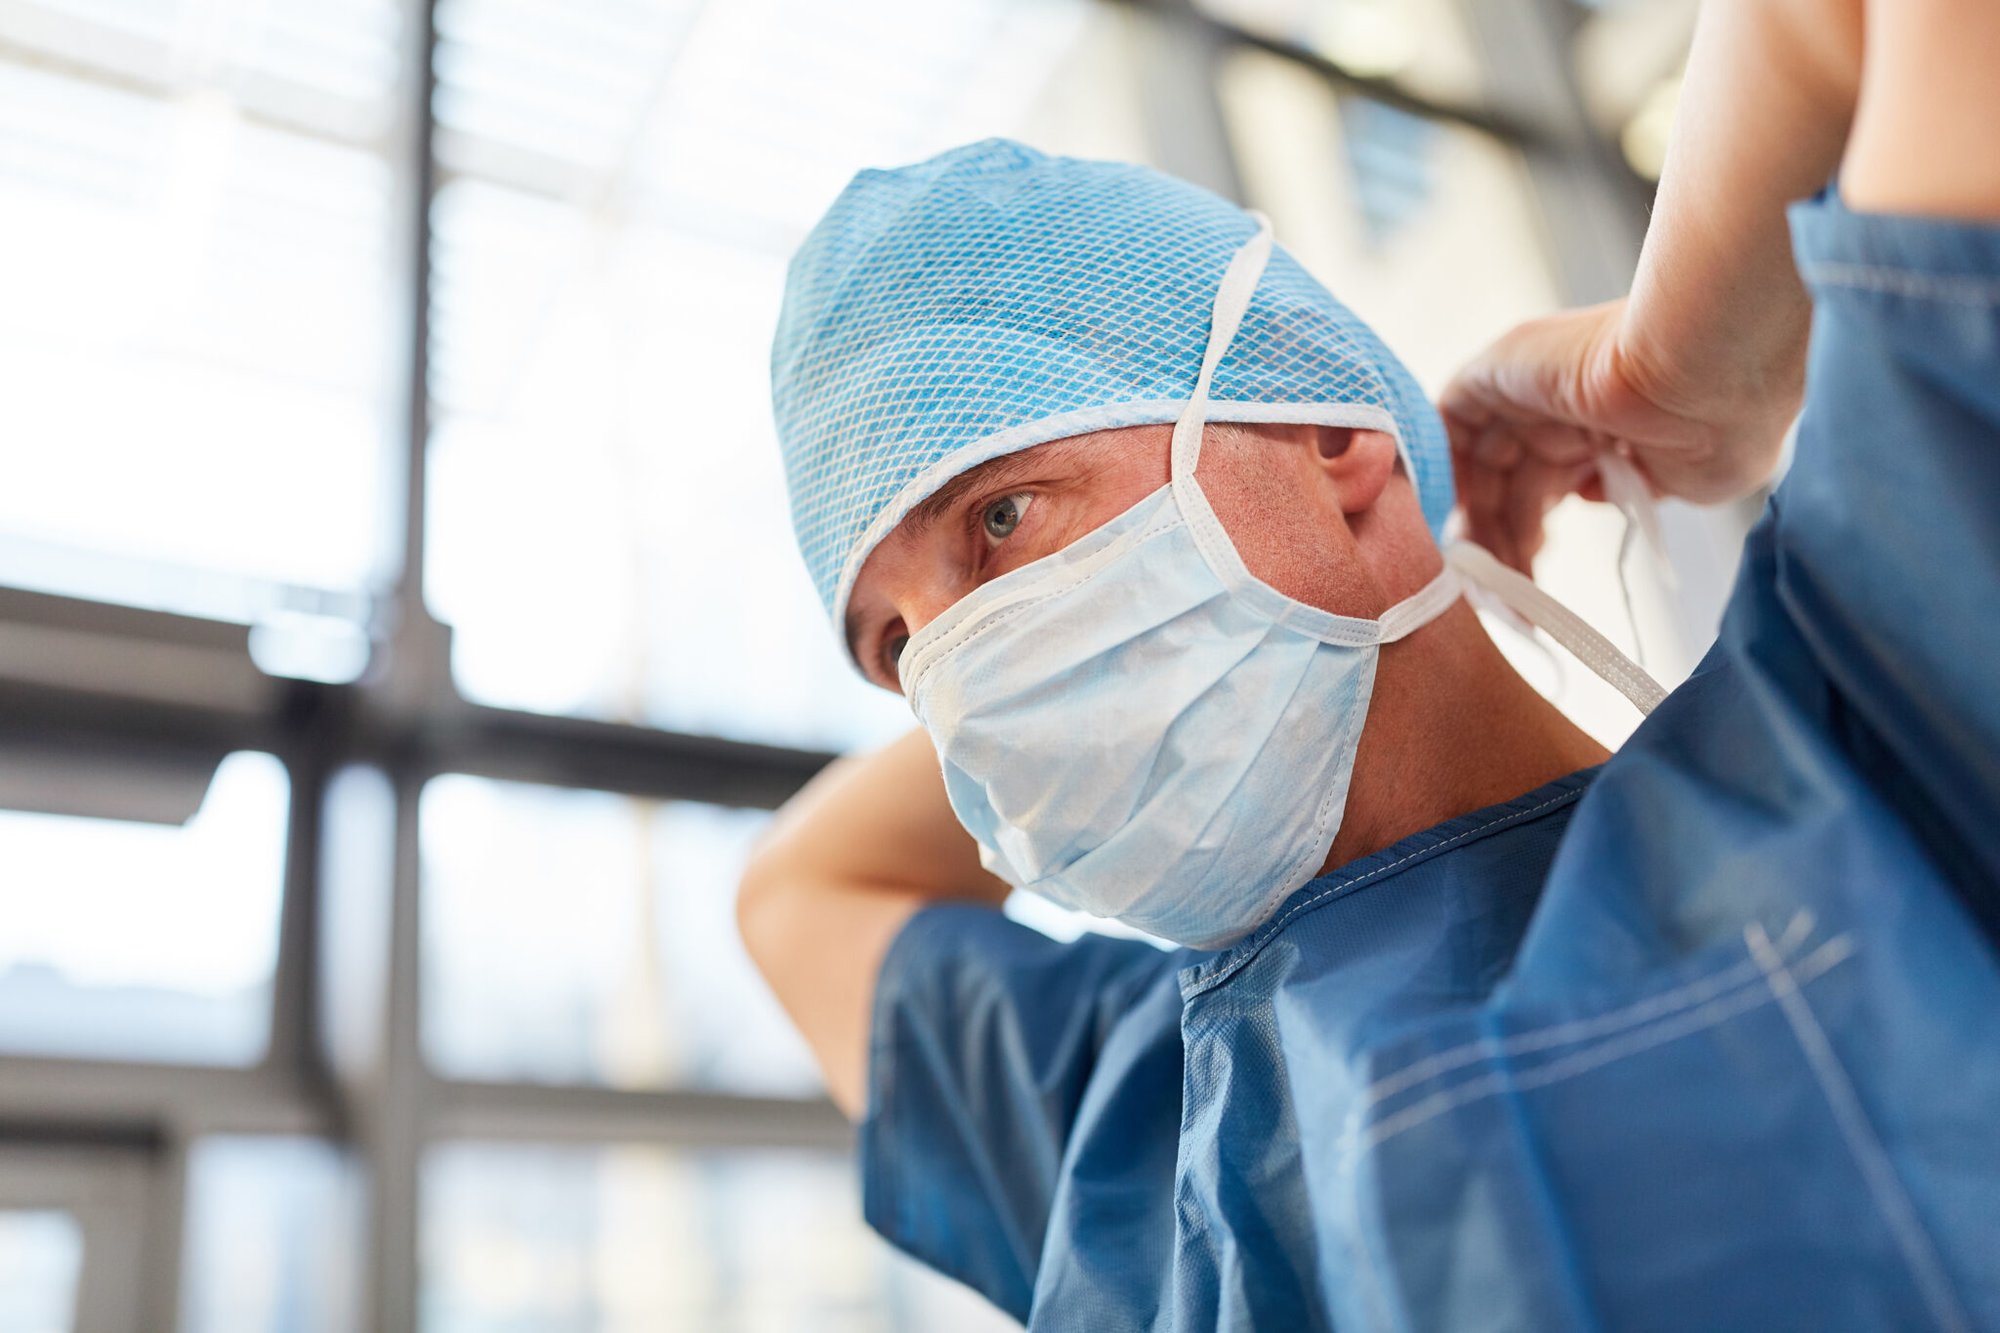 Surgeon in blue surgical gown binds the mouthguard for an emergency